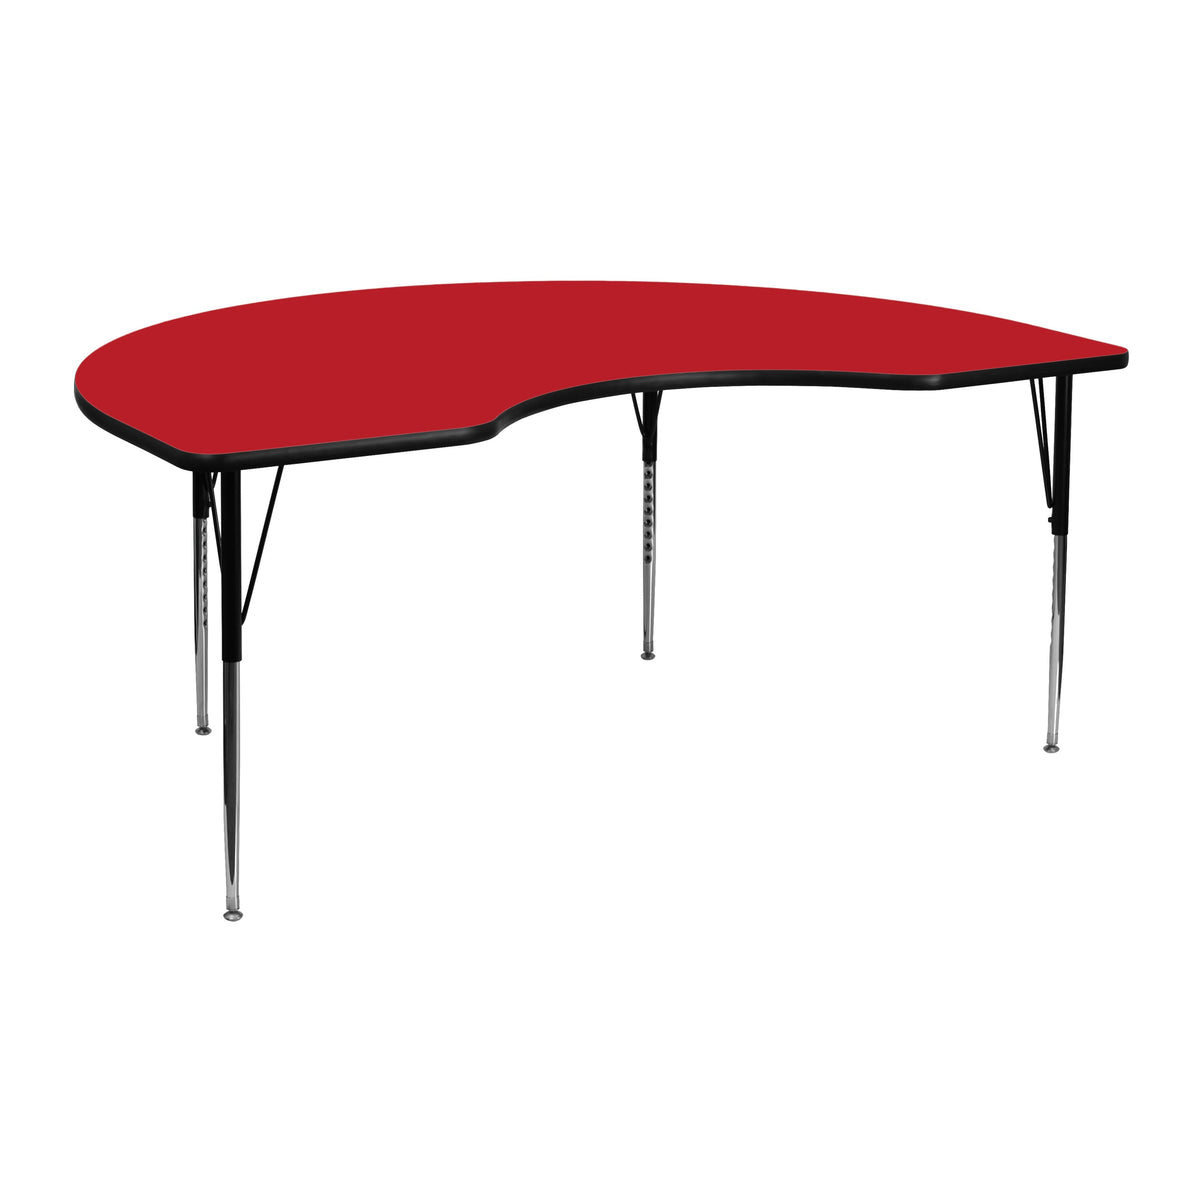 Red |#| 48inchW x 72inchL Kidney Red HP Laminate Activity Table - Height Adjustable Legs